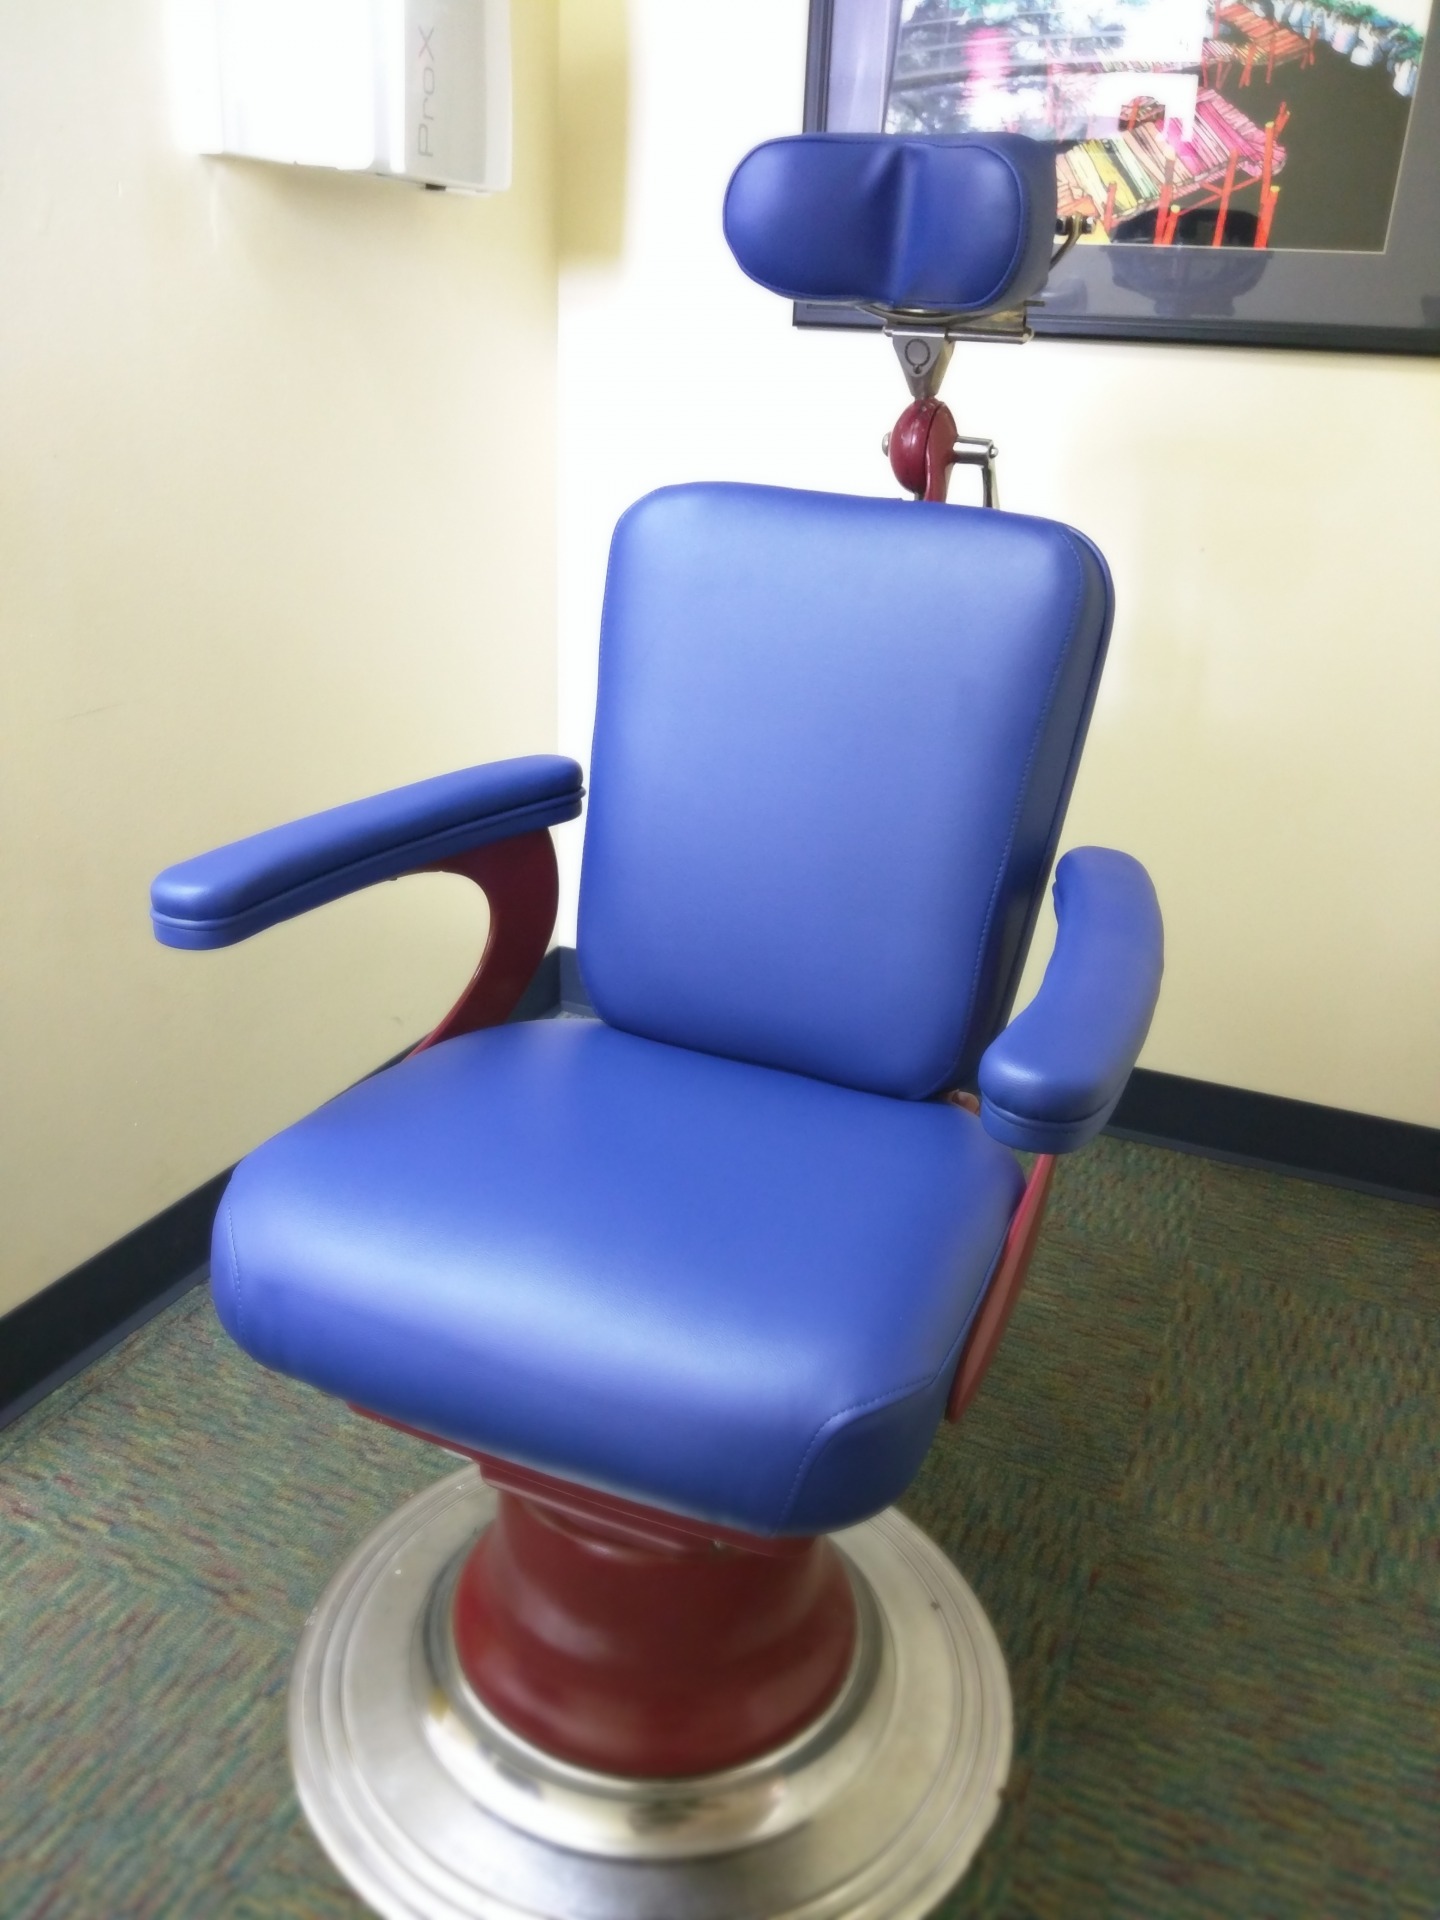 Retro X-Ray Dental Chair Recovered in Olympus Royal